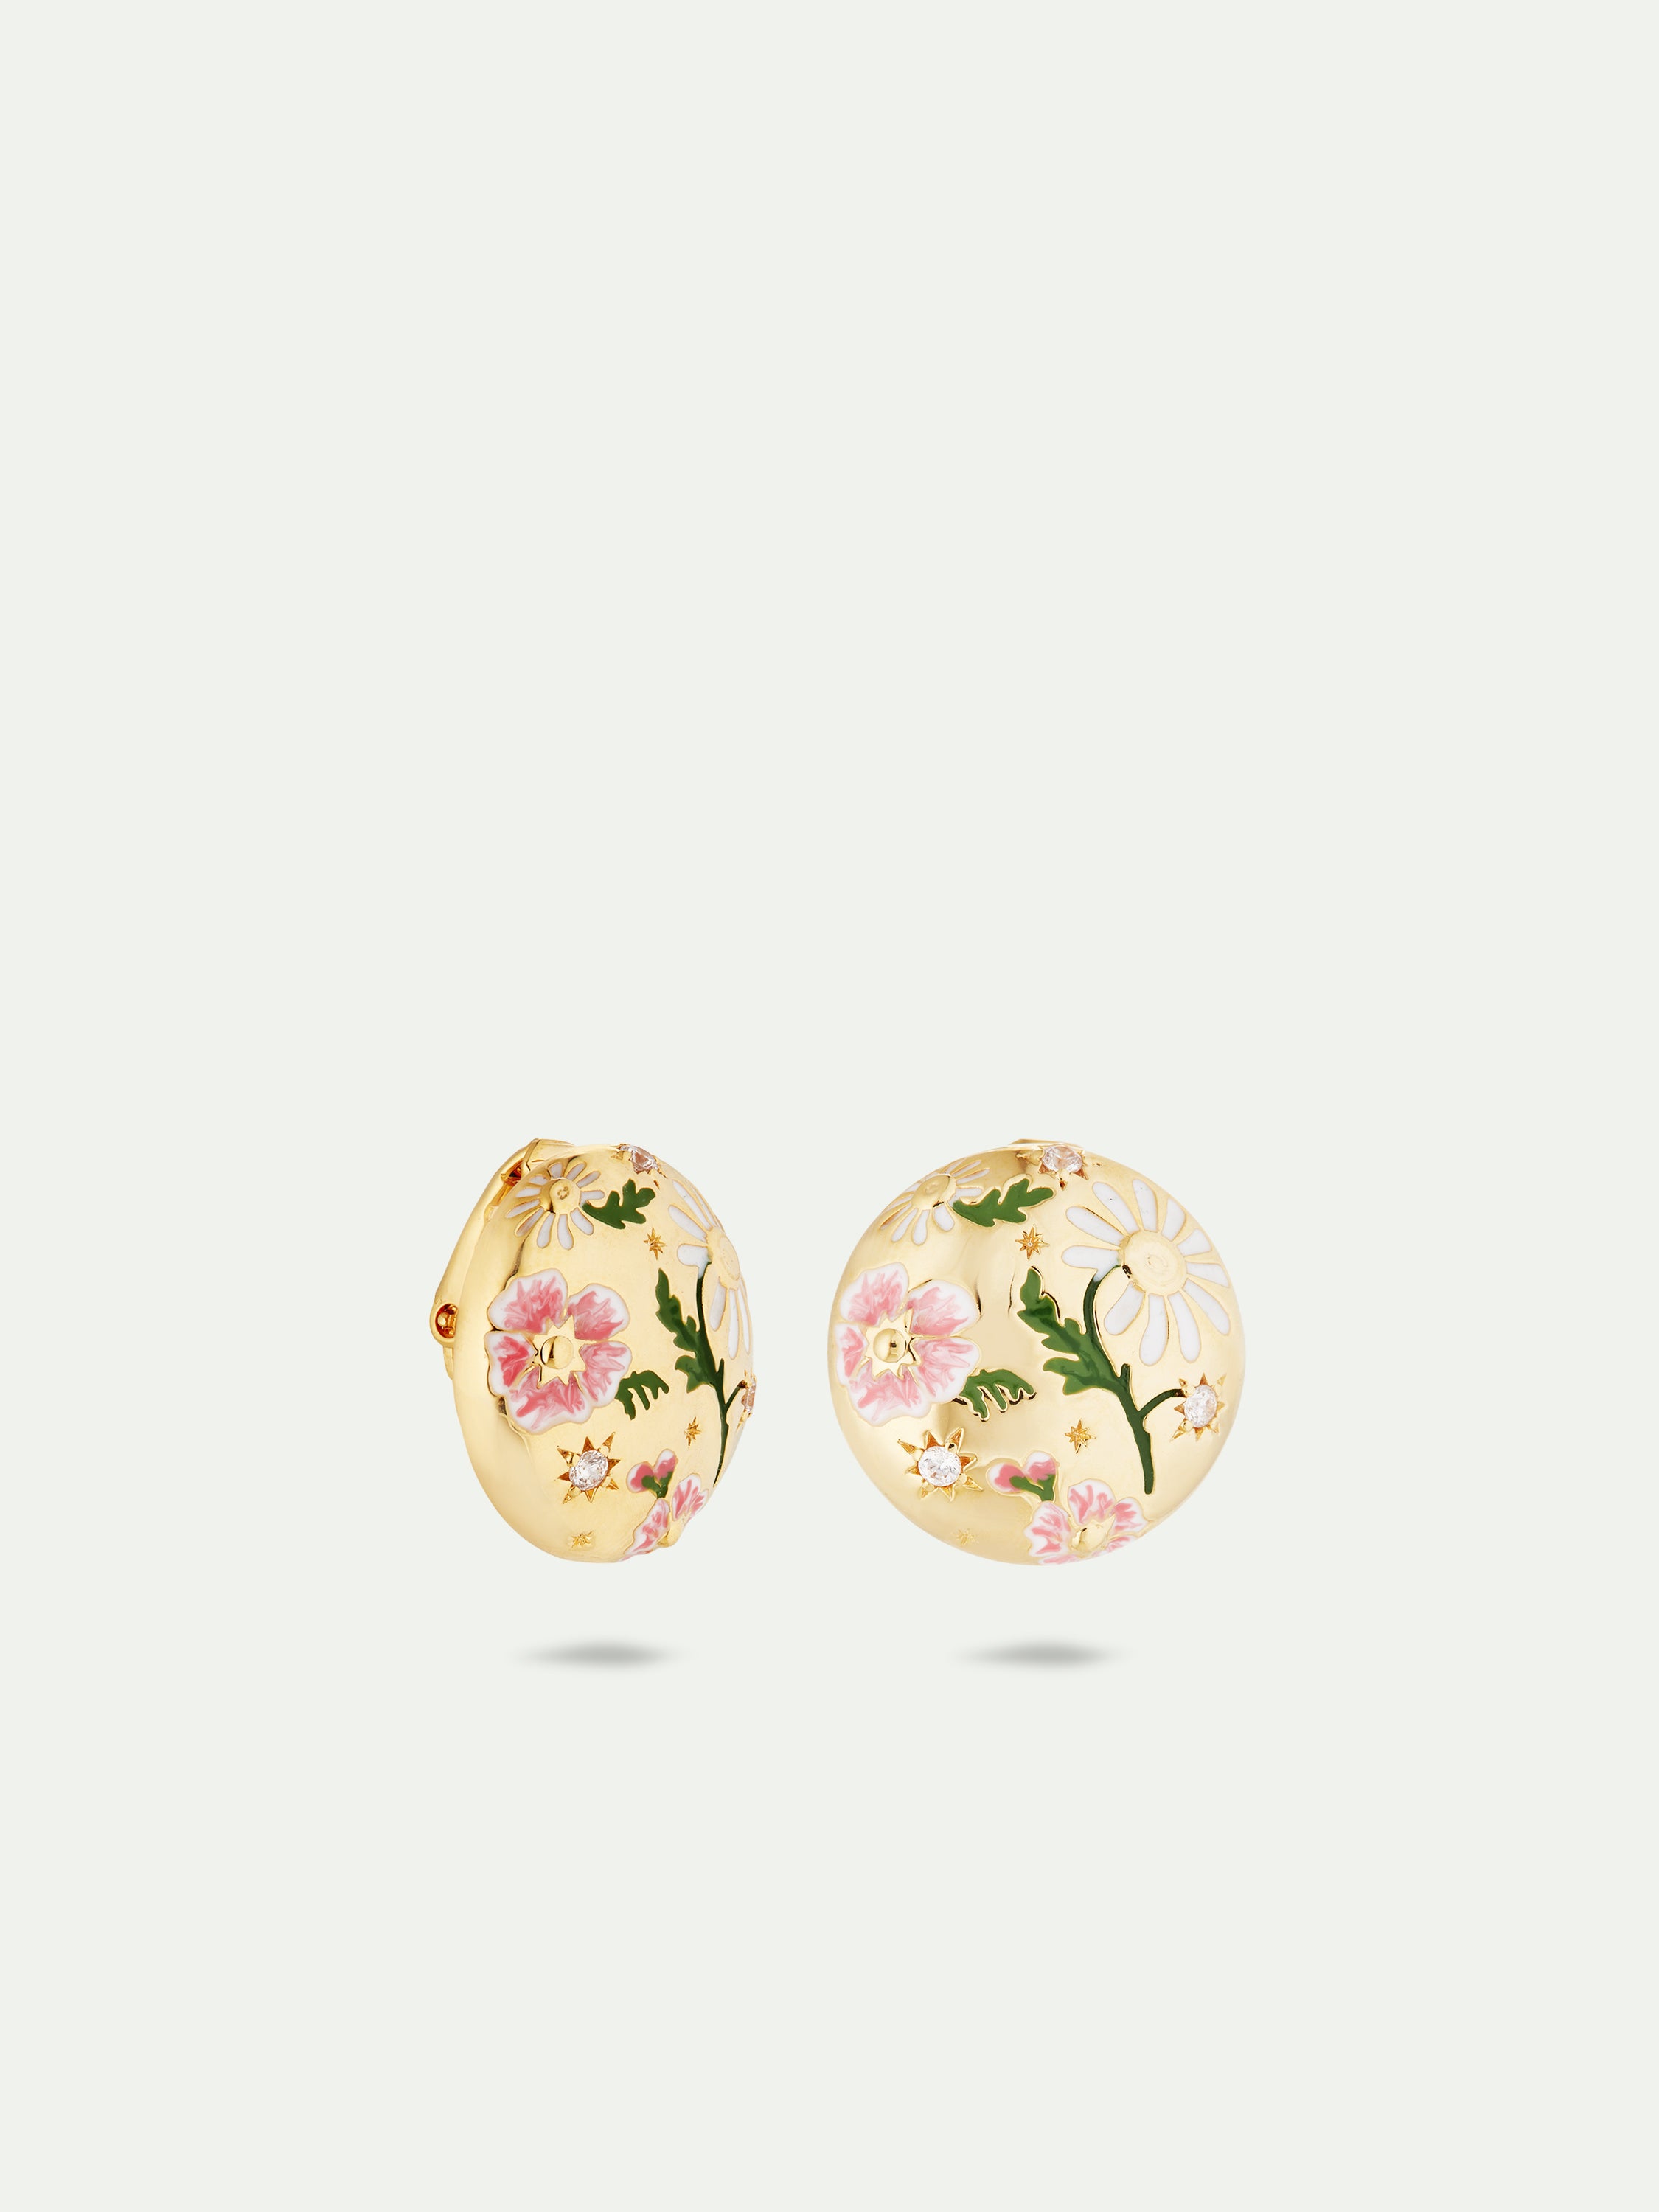 Daisy and pansy flower clip-on earrings